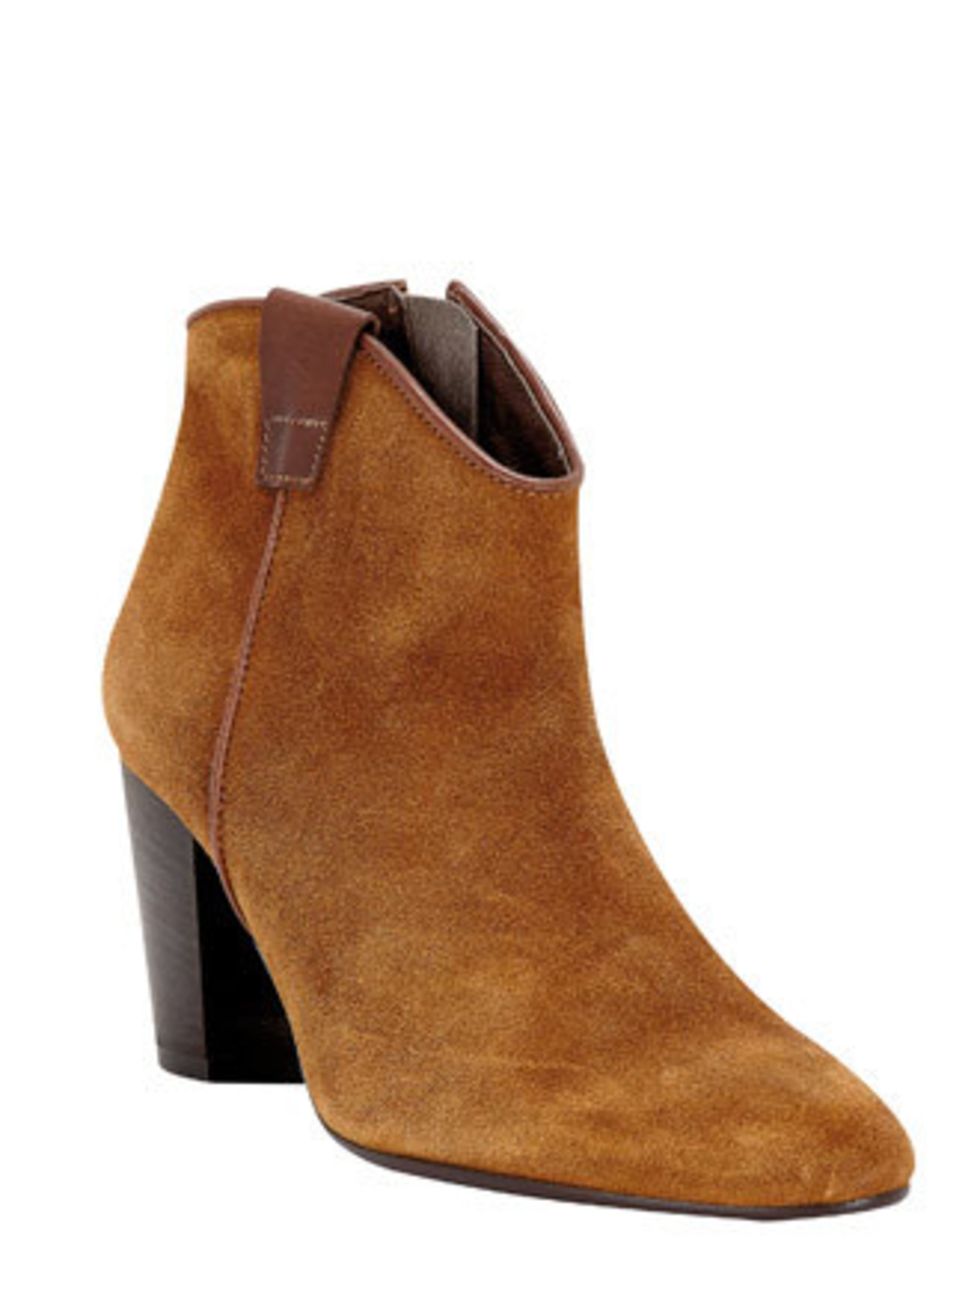 <p>ELLE loves these boots. They are perfect for pairing with denim shorts, tea dresses and skinny jeans. Snap them up before we do.</p><p>Ankle boots, £65 by Oasis</p>